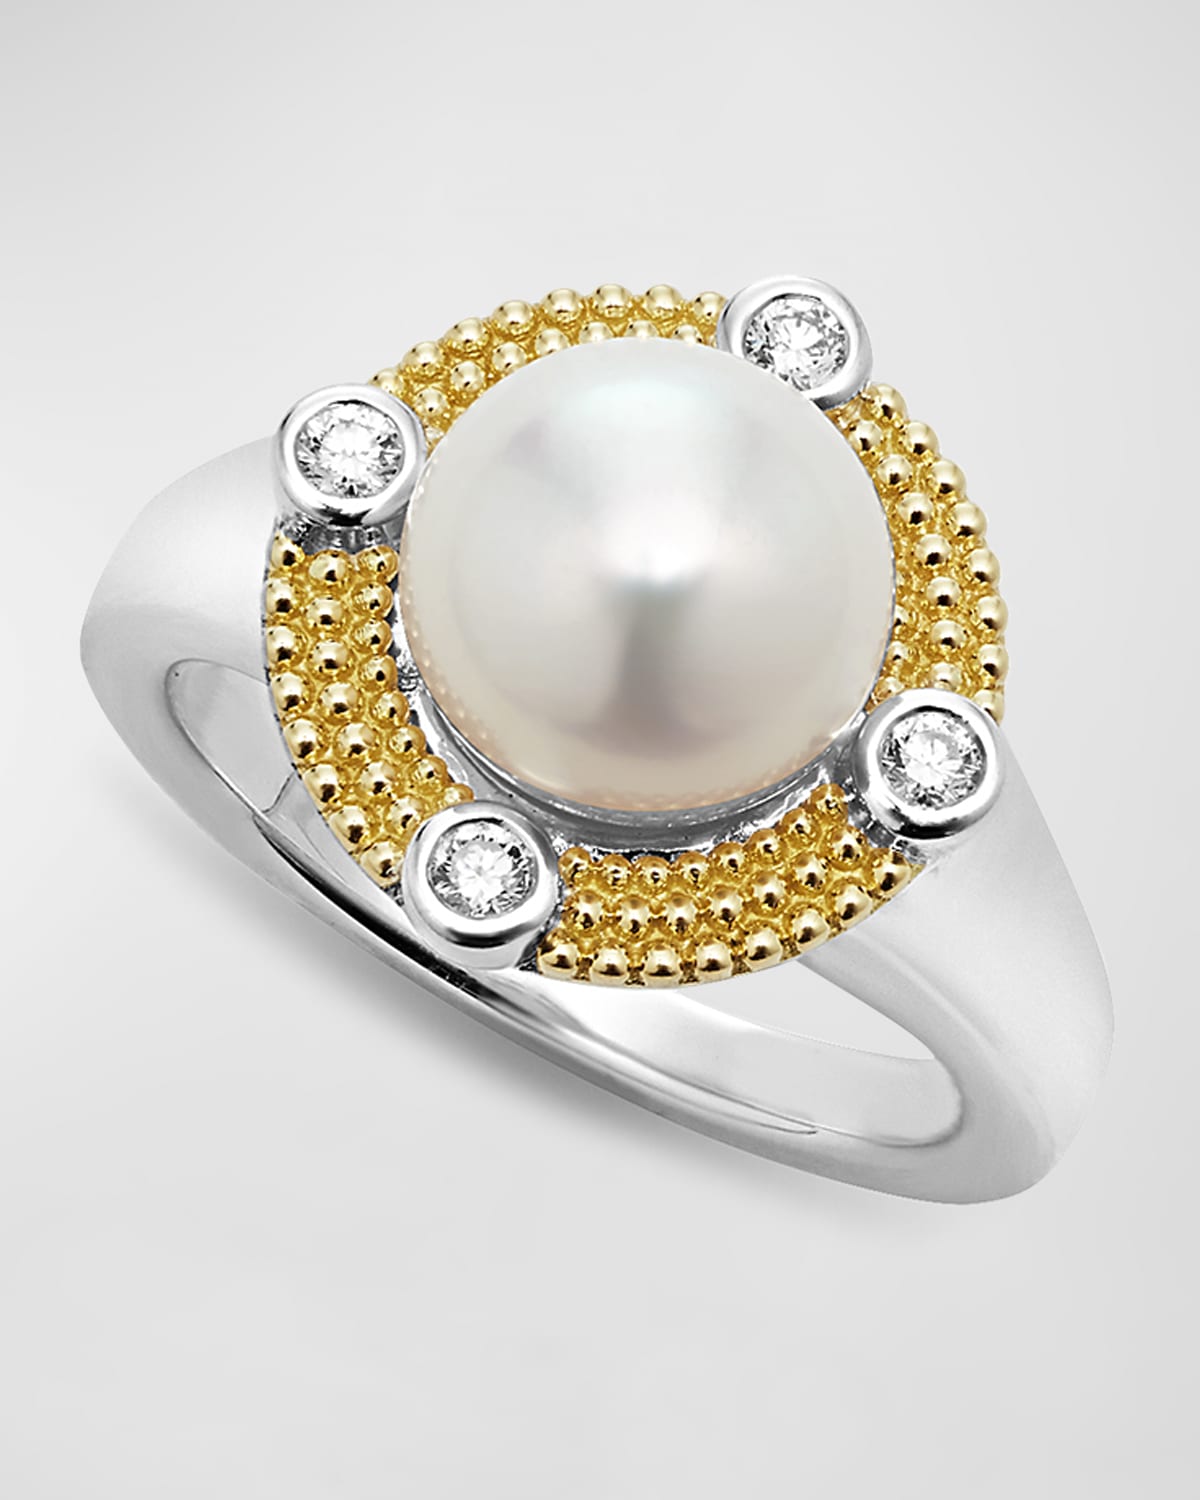 Sterling Silver and 18K Luna Pearl Lux with Diamond Ring, Size 7